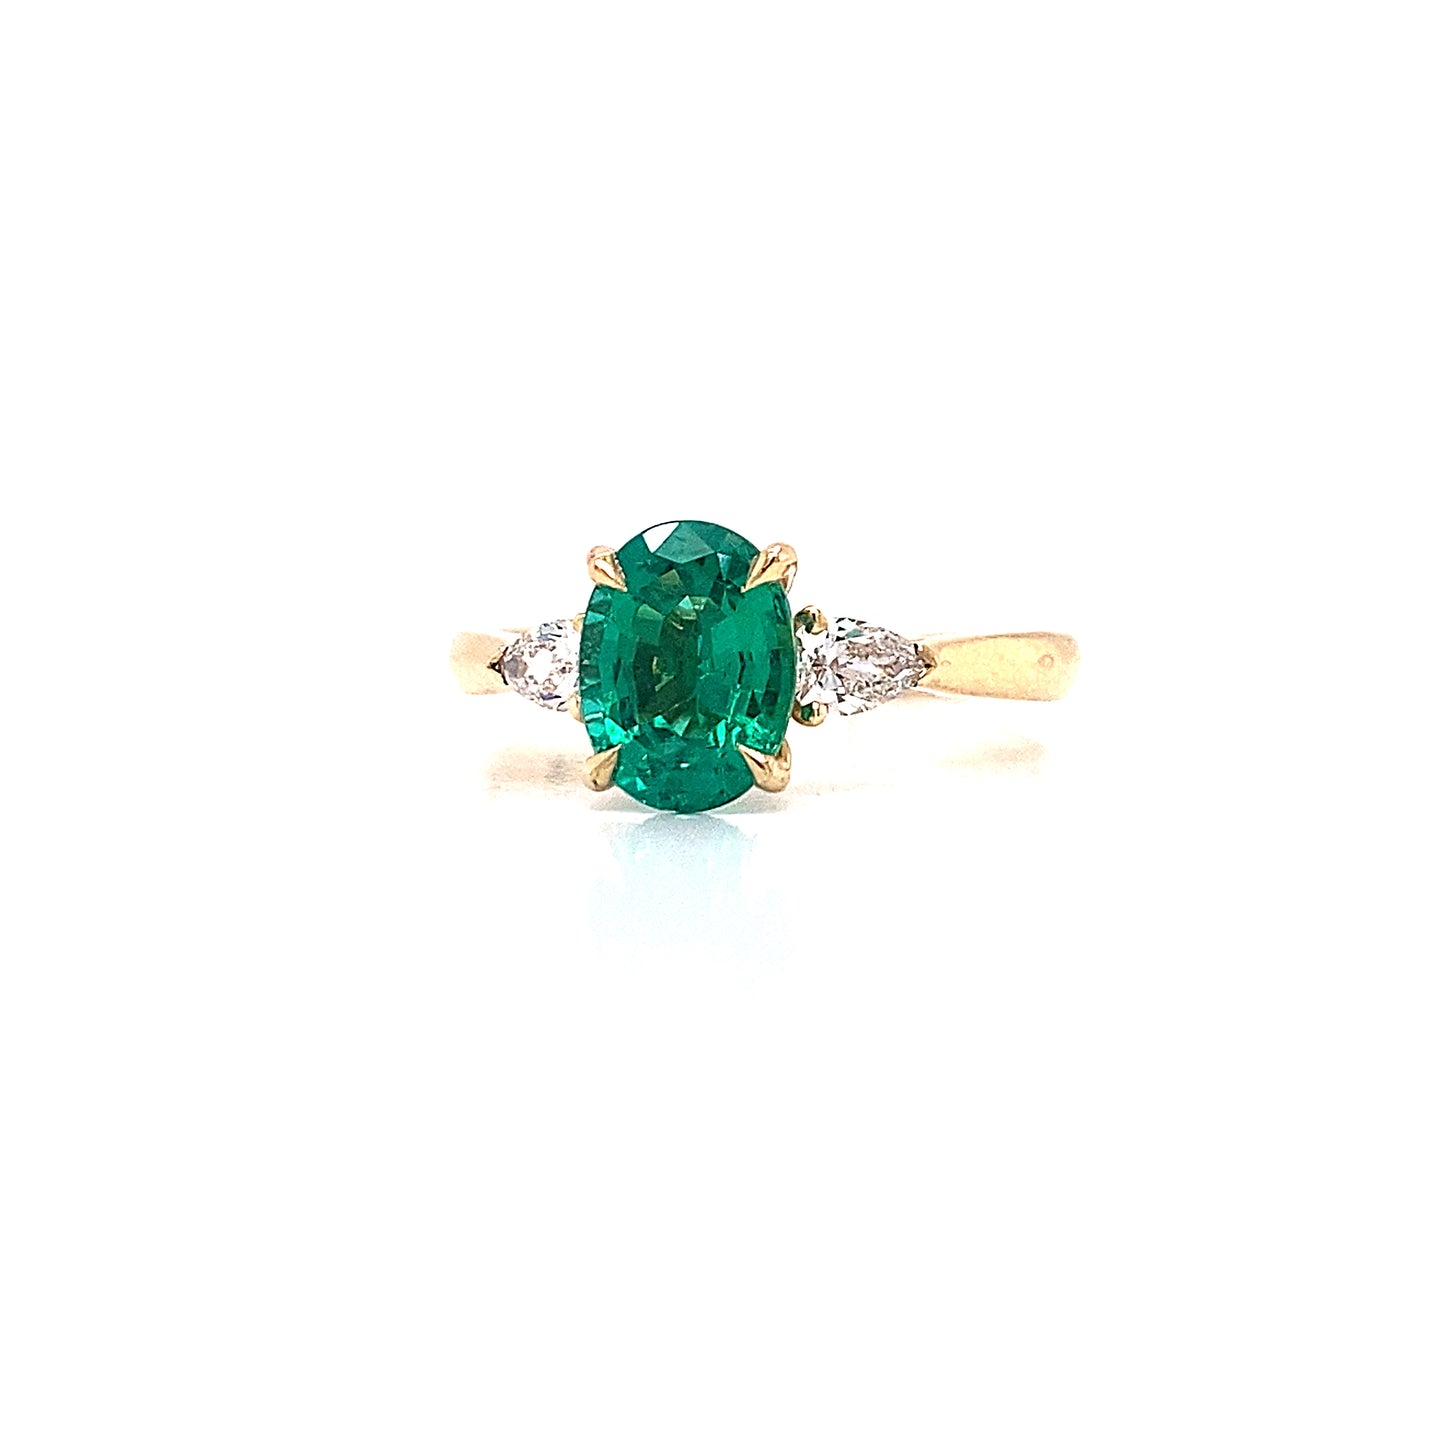 Oval emerald & pear shaped diamond engagement ring